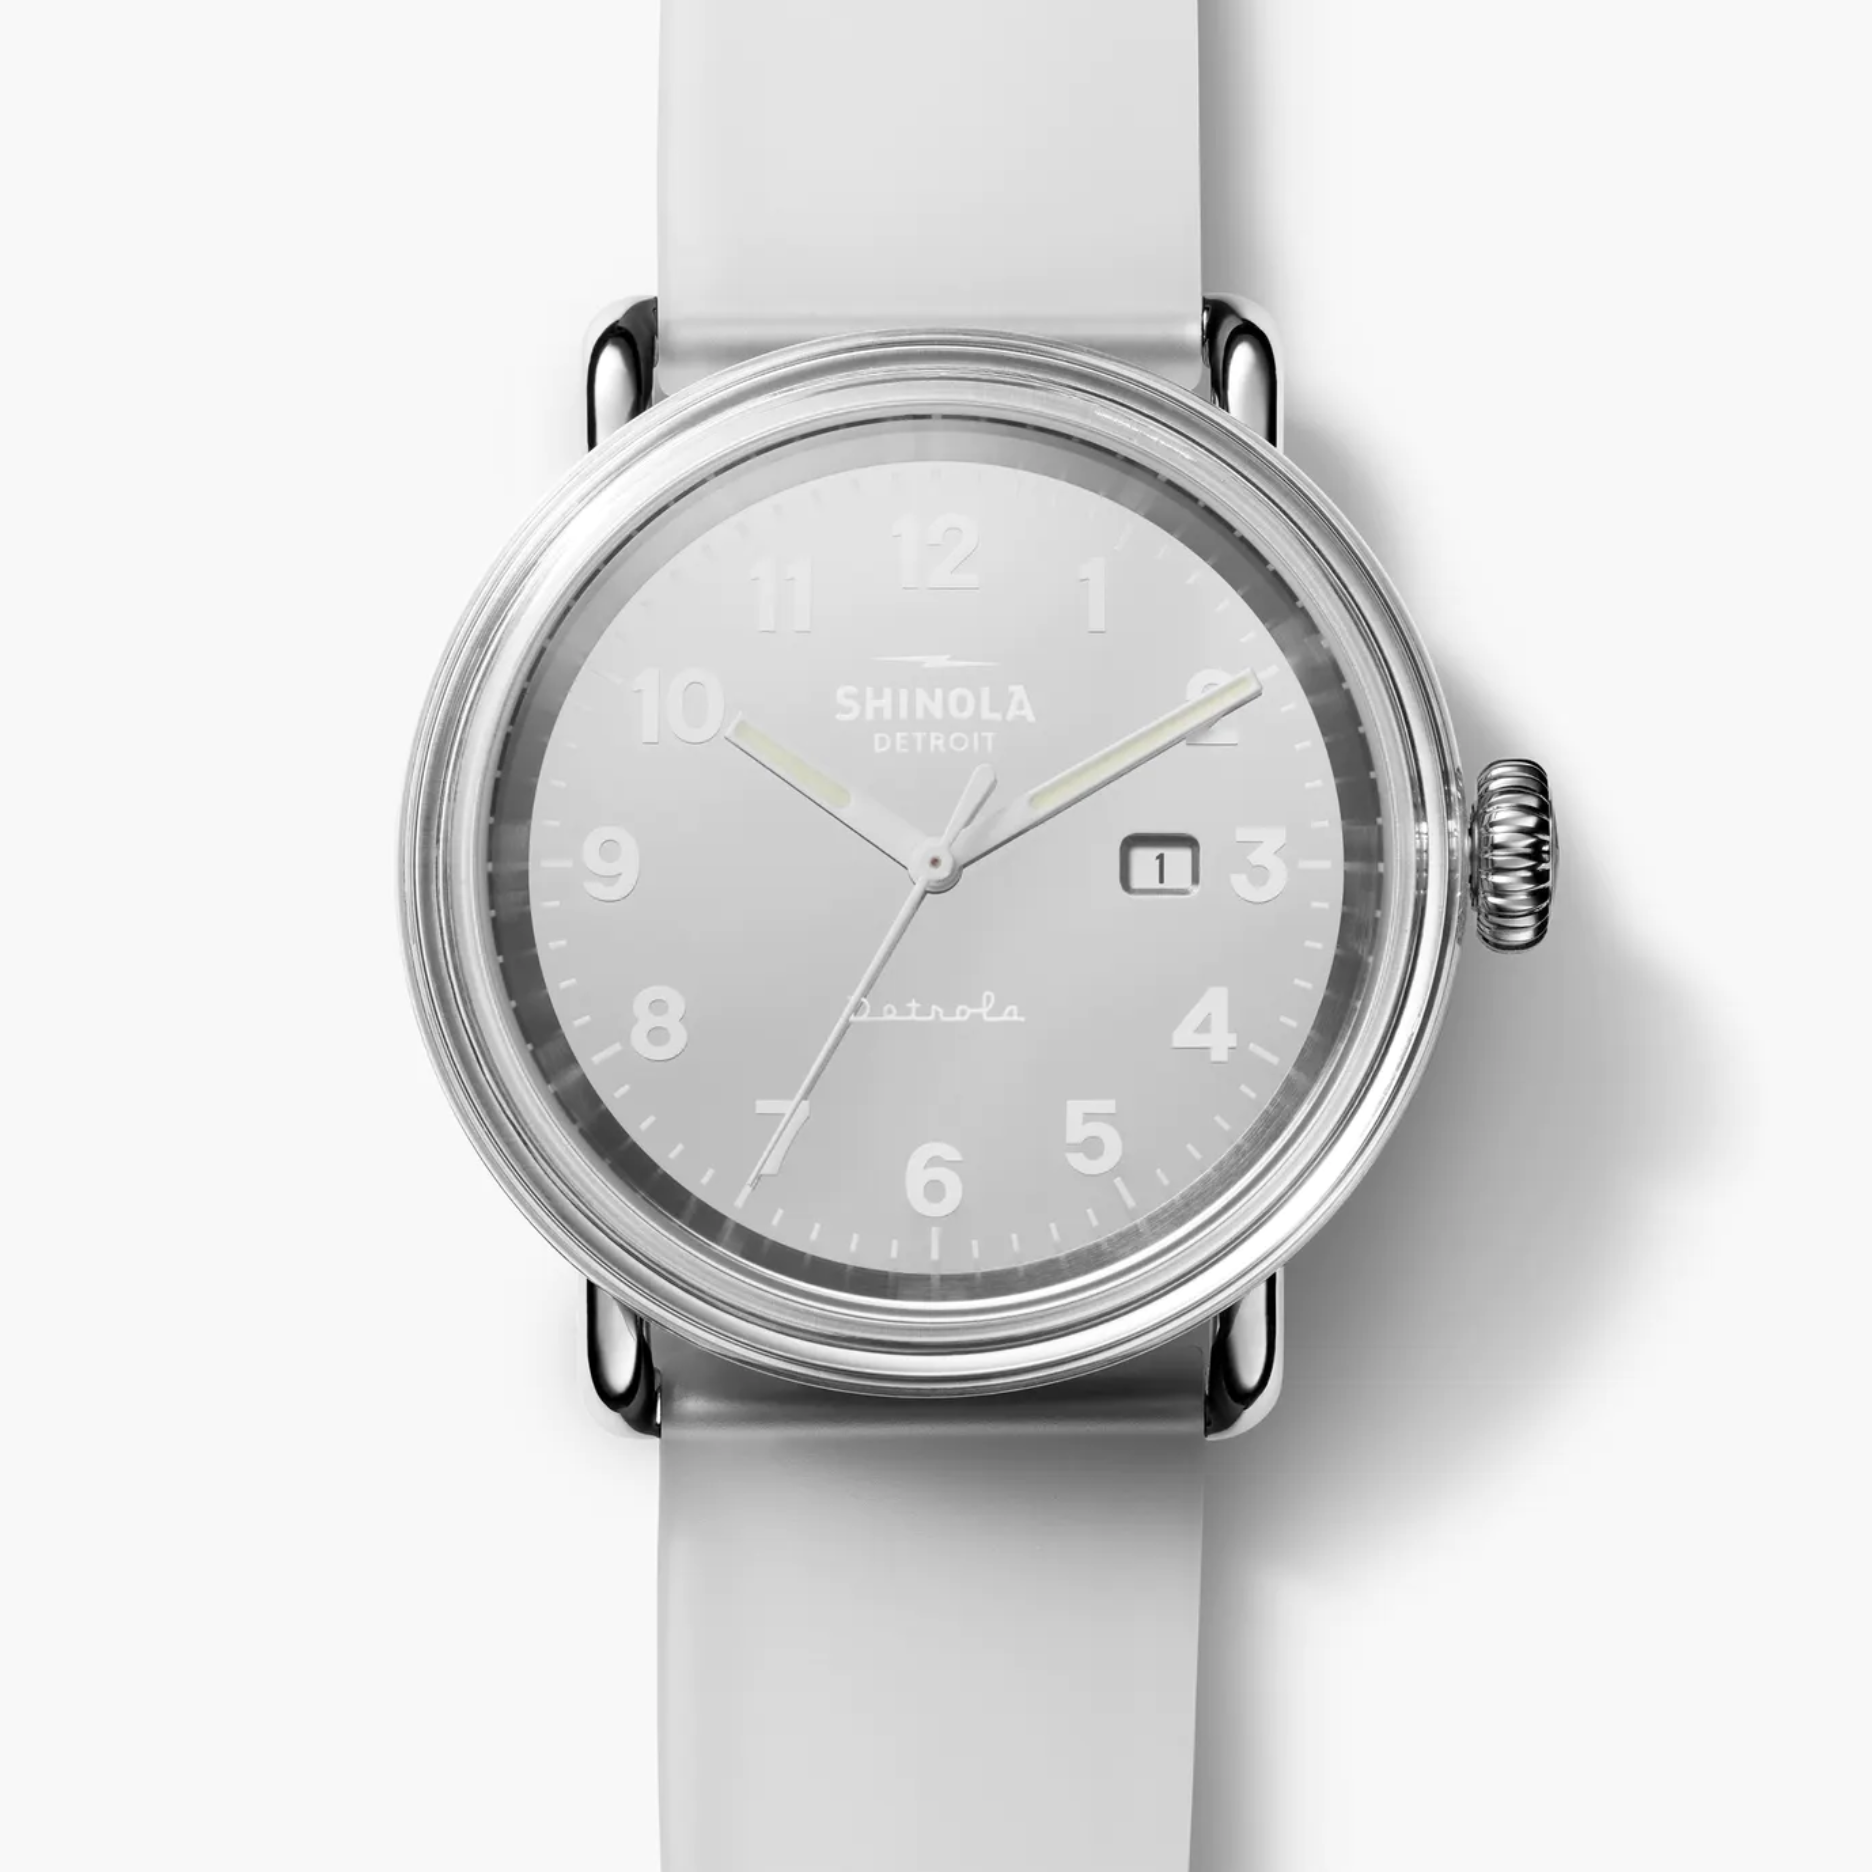 Shinola Aims Younger With Lower Prices